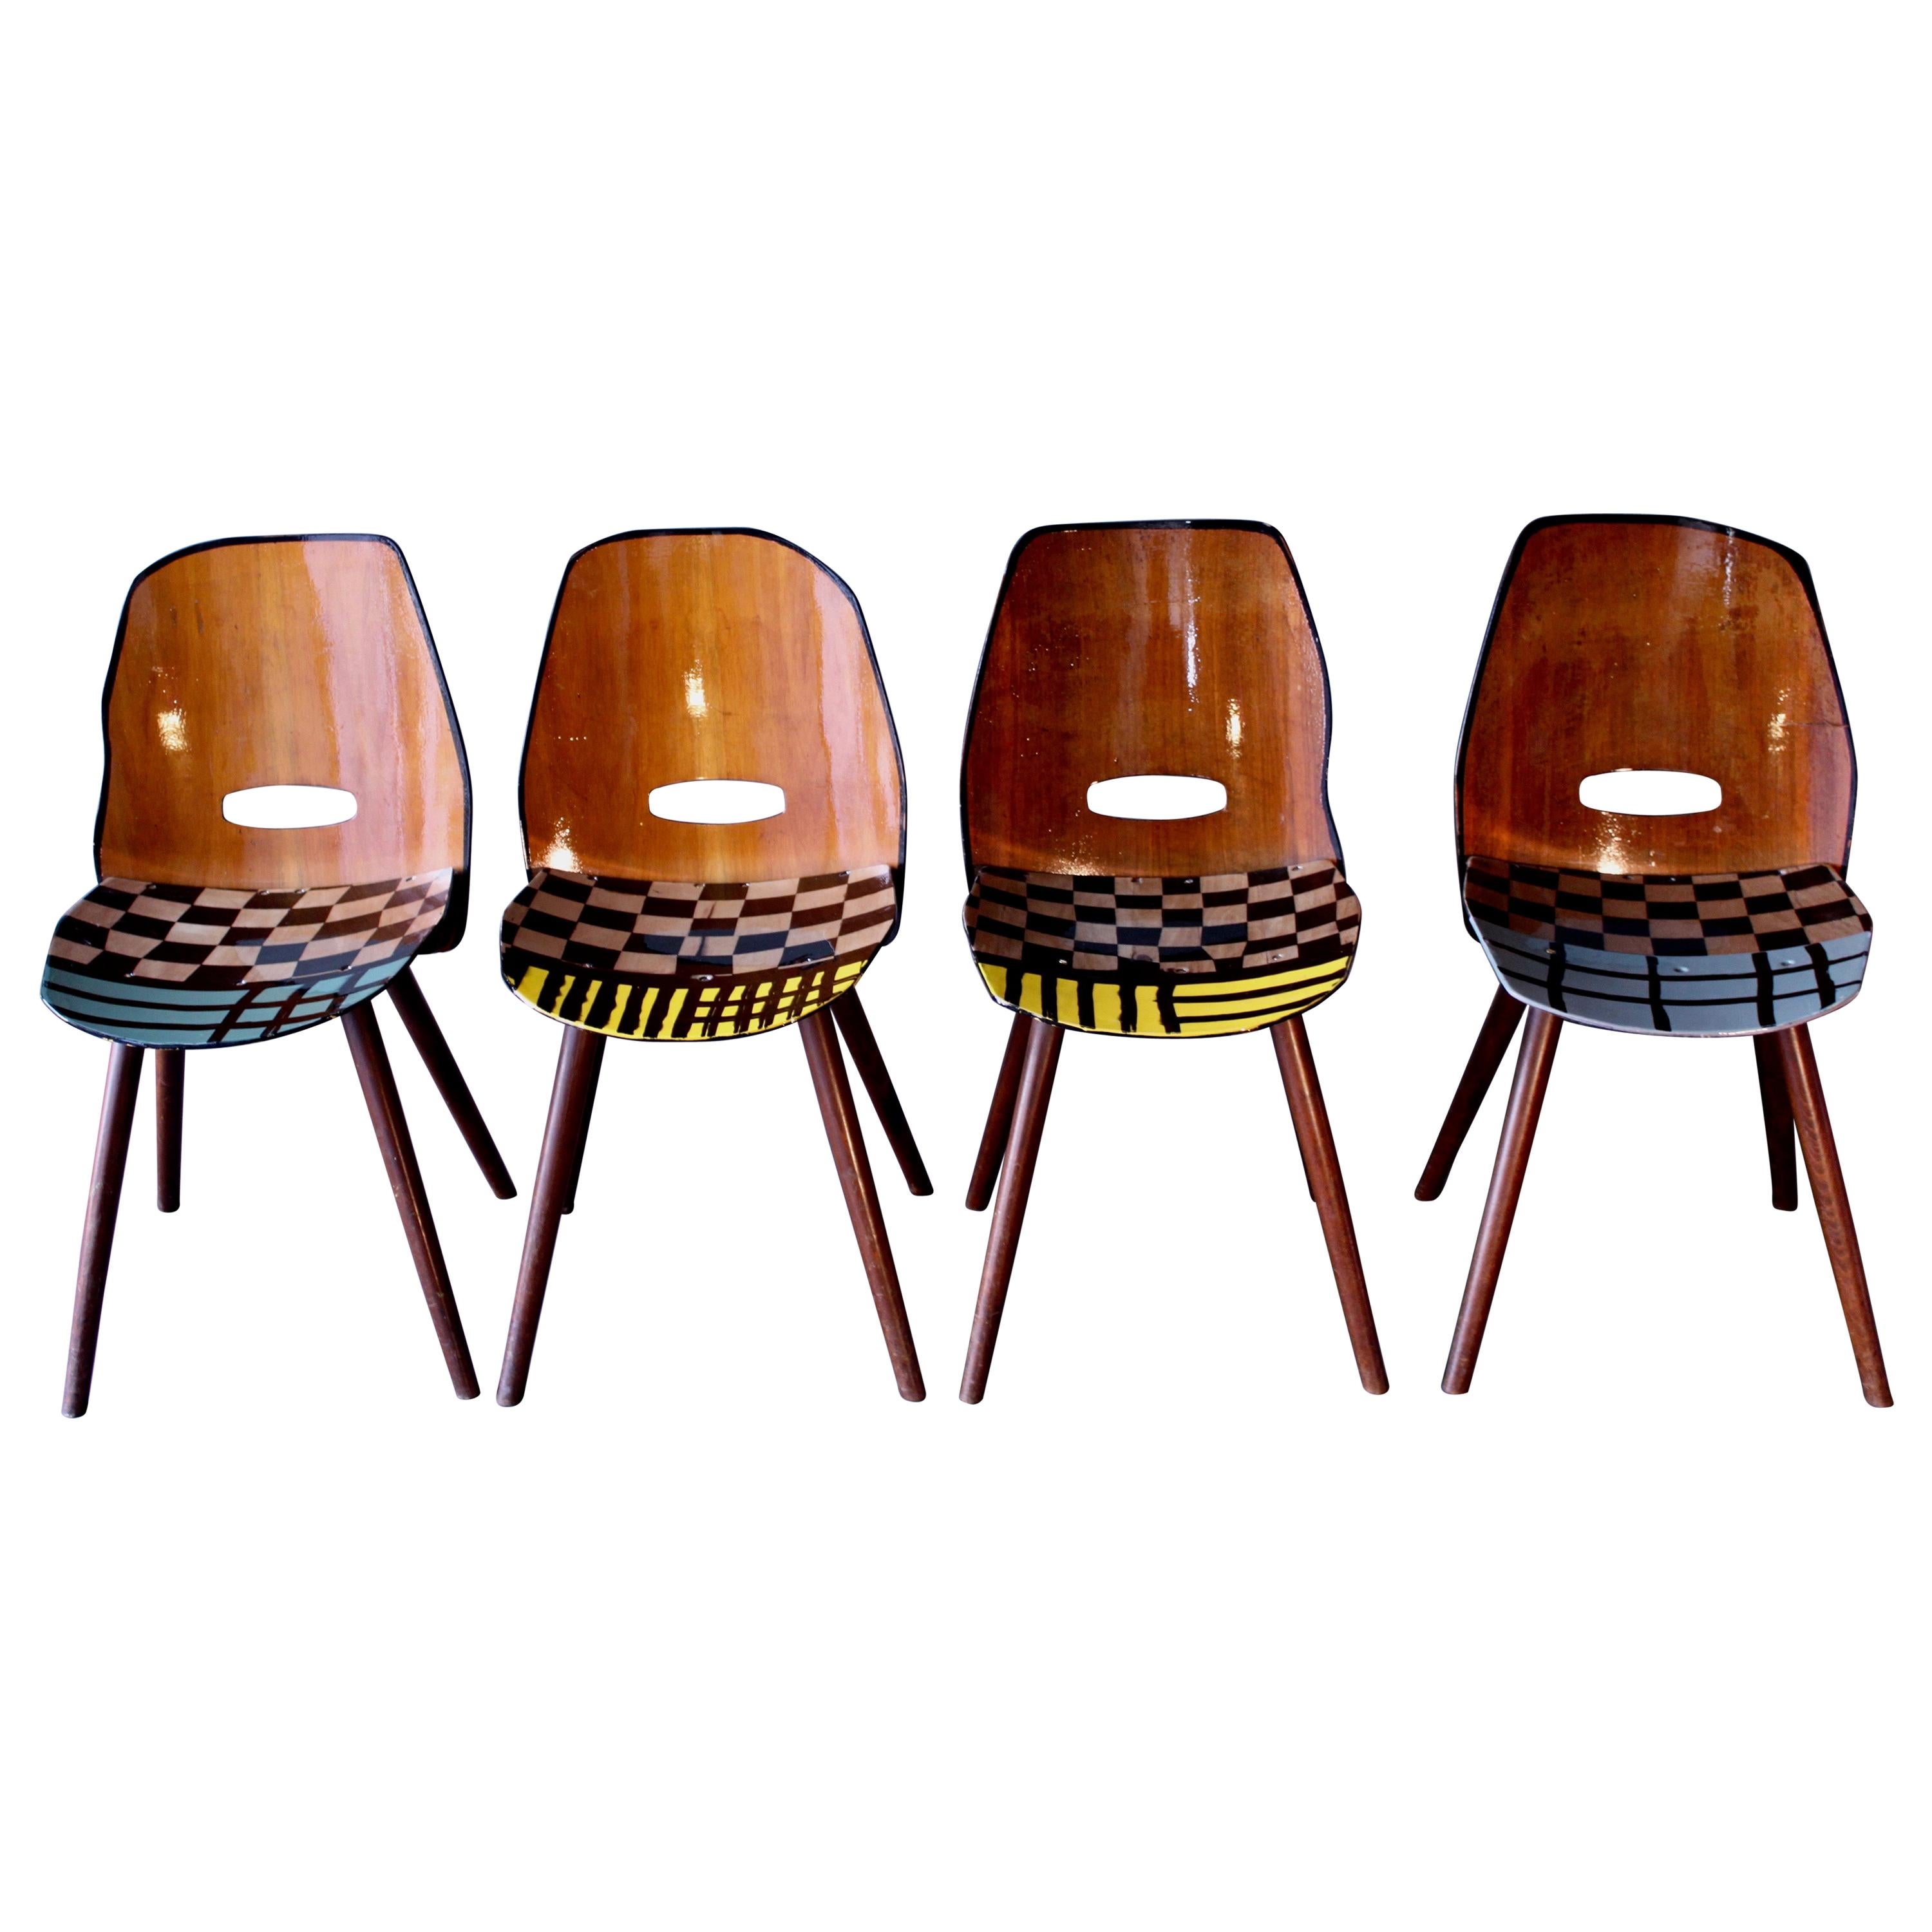 4 Dining Room Chairs, "Es Wird Schon", Out of the Black Is Beautiful Series For Sale